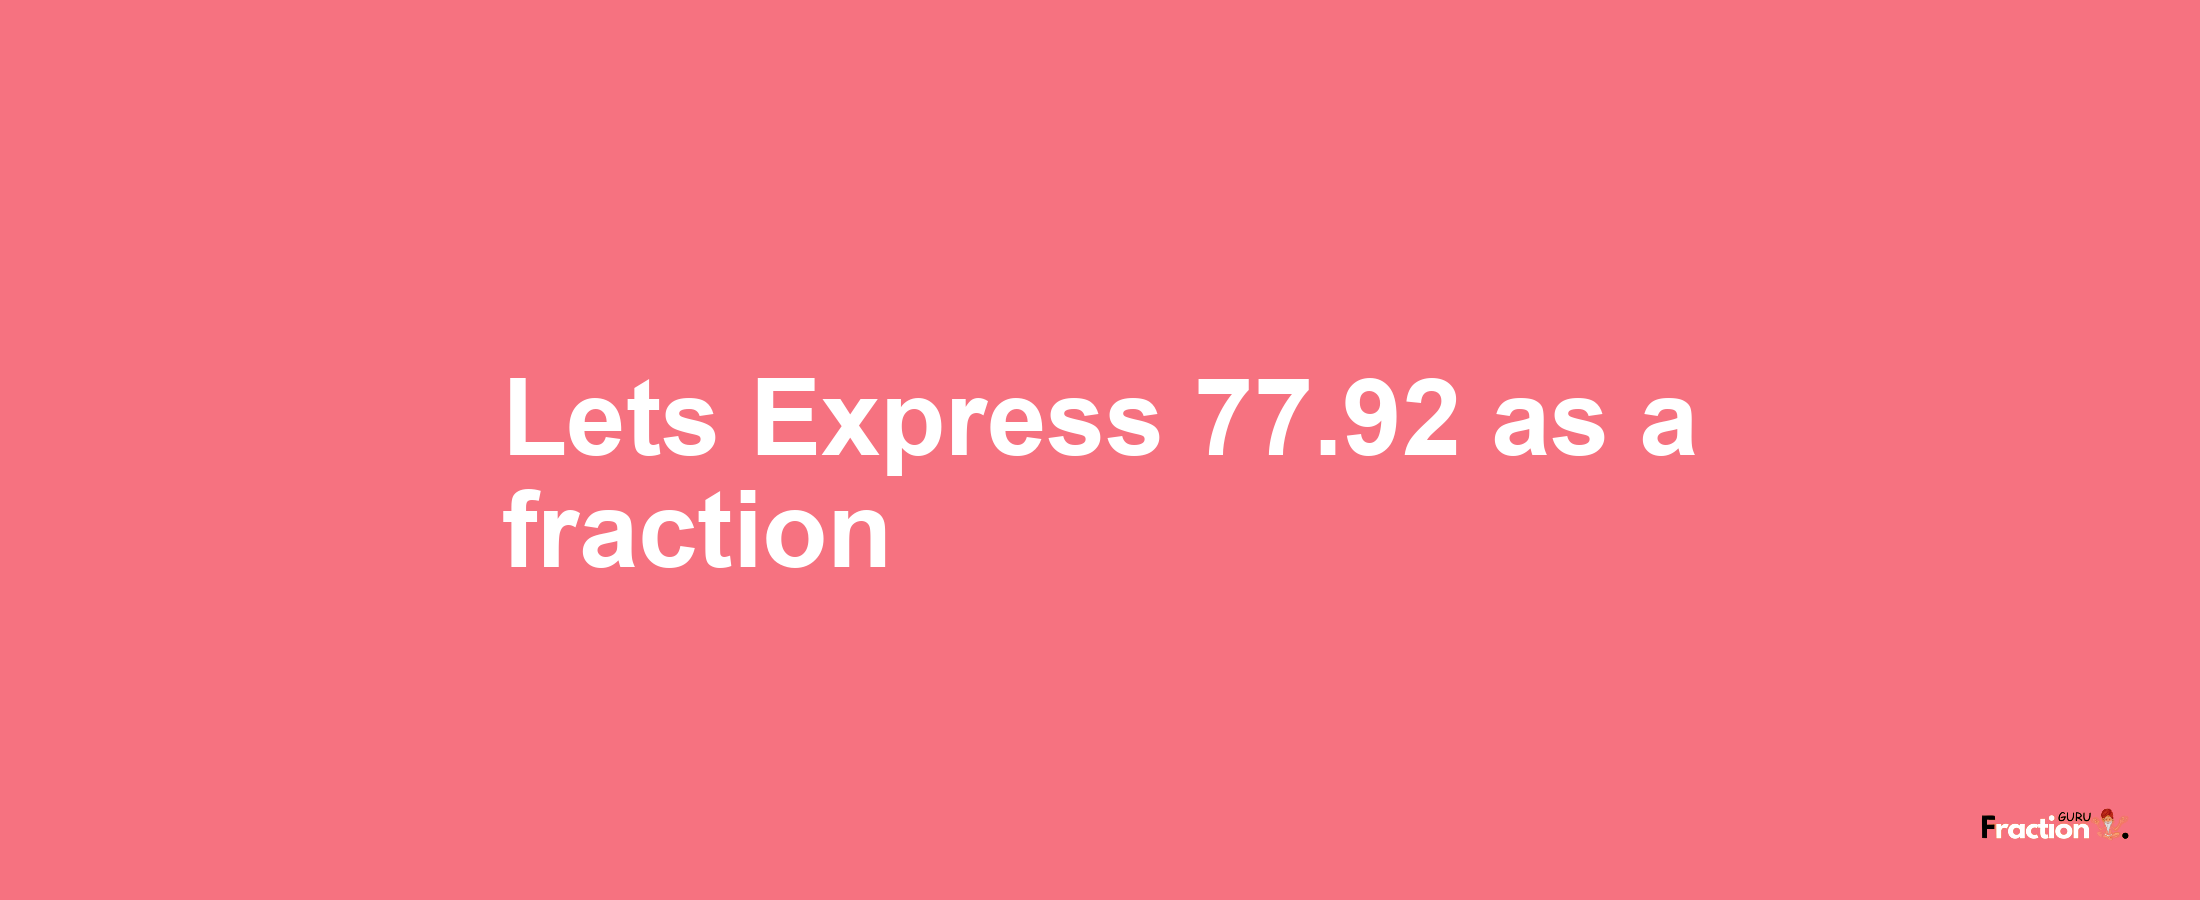 Lets Express 77.92 as afraction